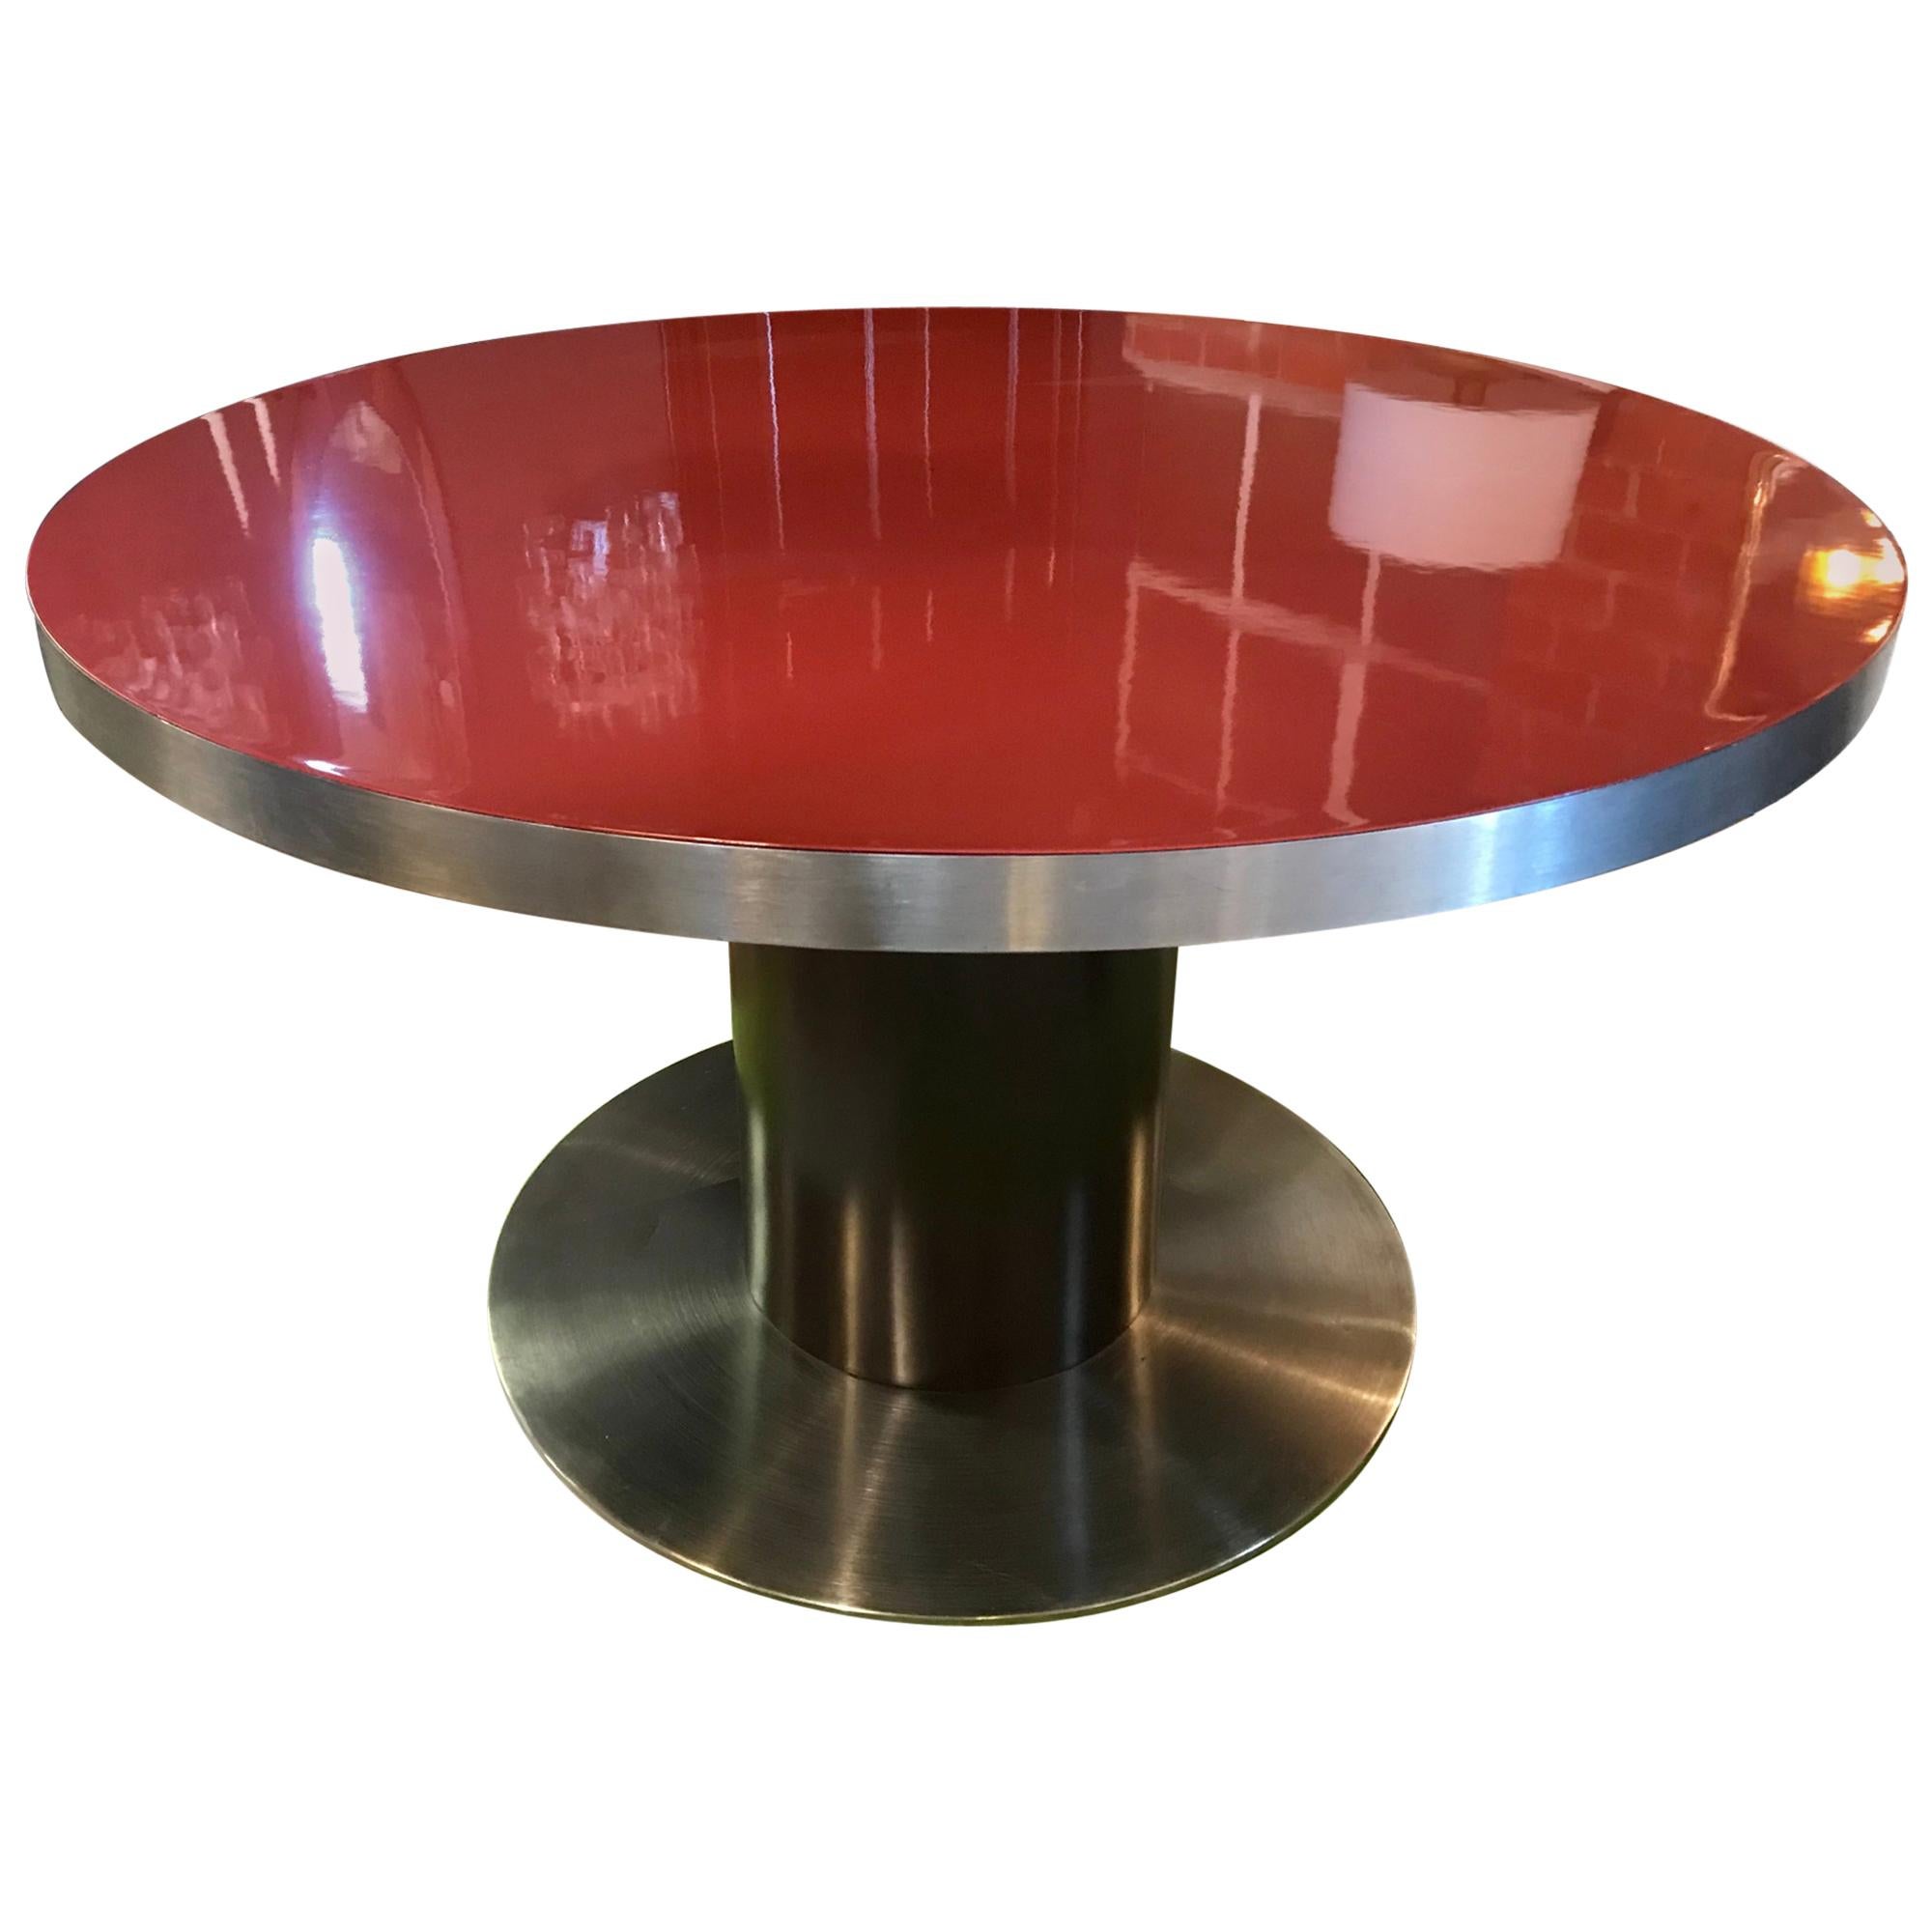 Stainless Steel and Red Top Round Dining Table by Willy Rizzo, Italy, 1970s